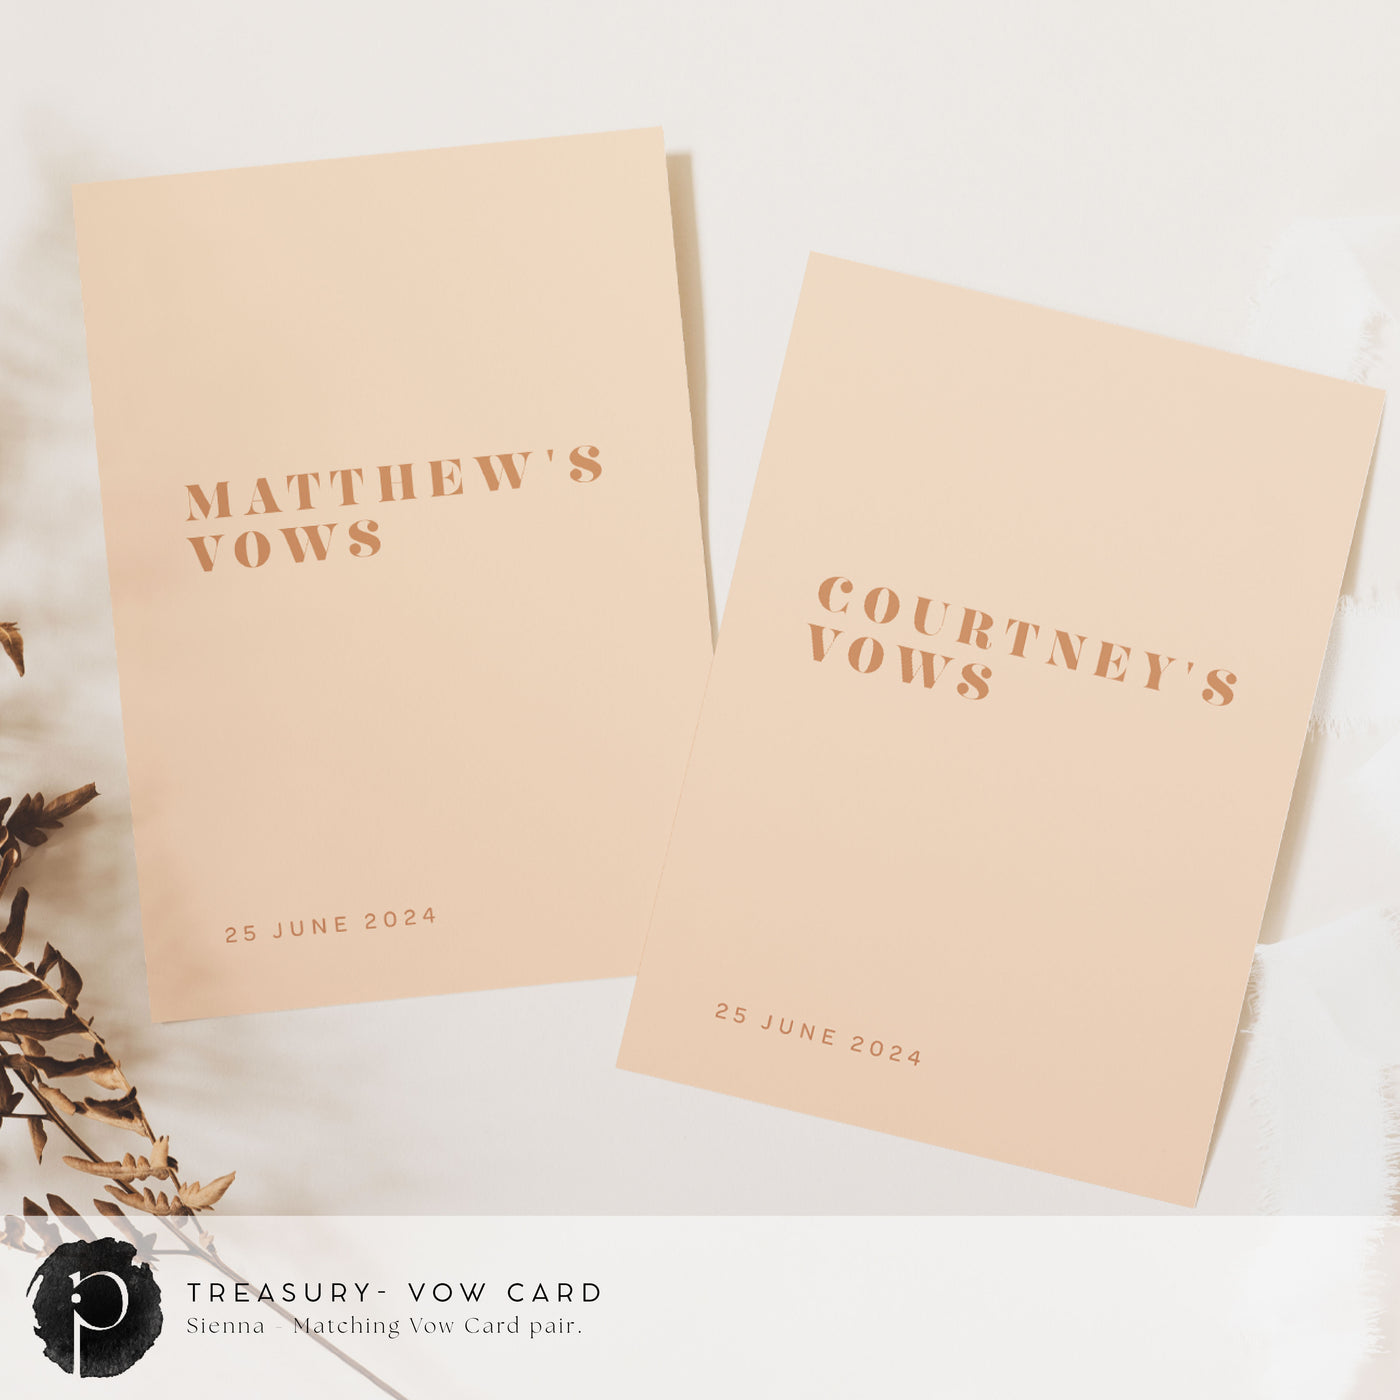 A pair of vow cards to write your wedding vows on in a formal modern wedding theme with light terracotta writing on a soft peach background